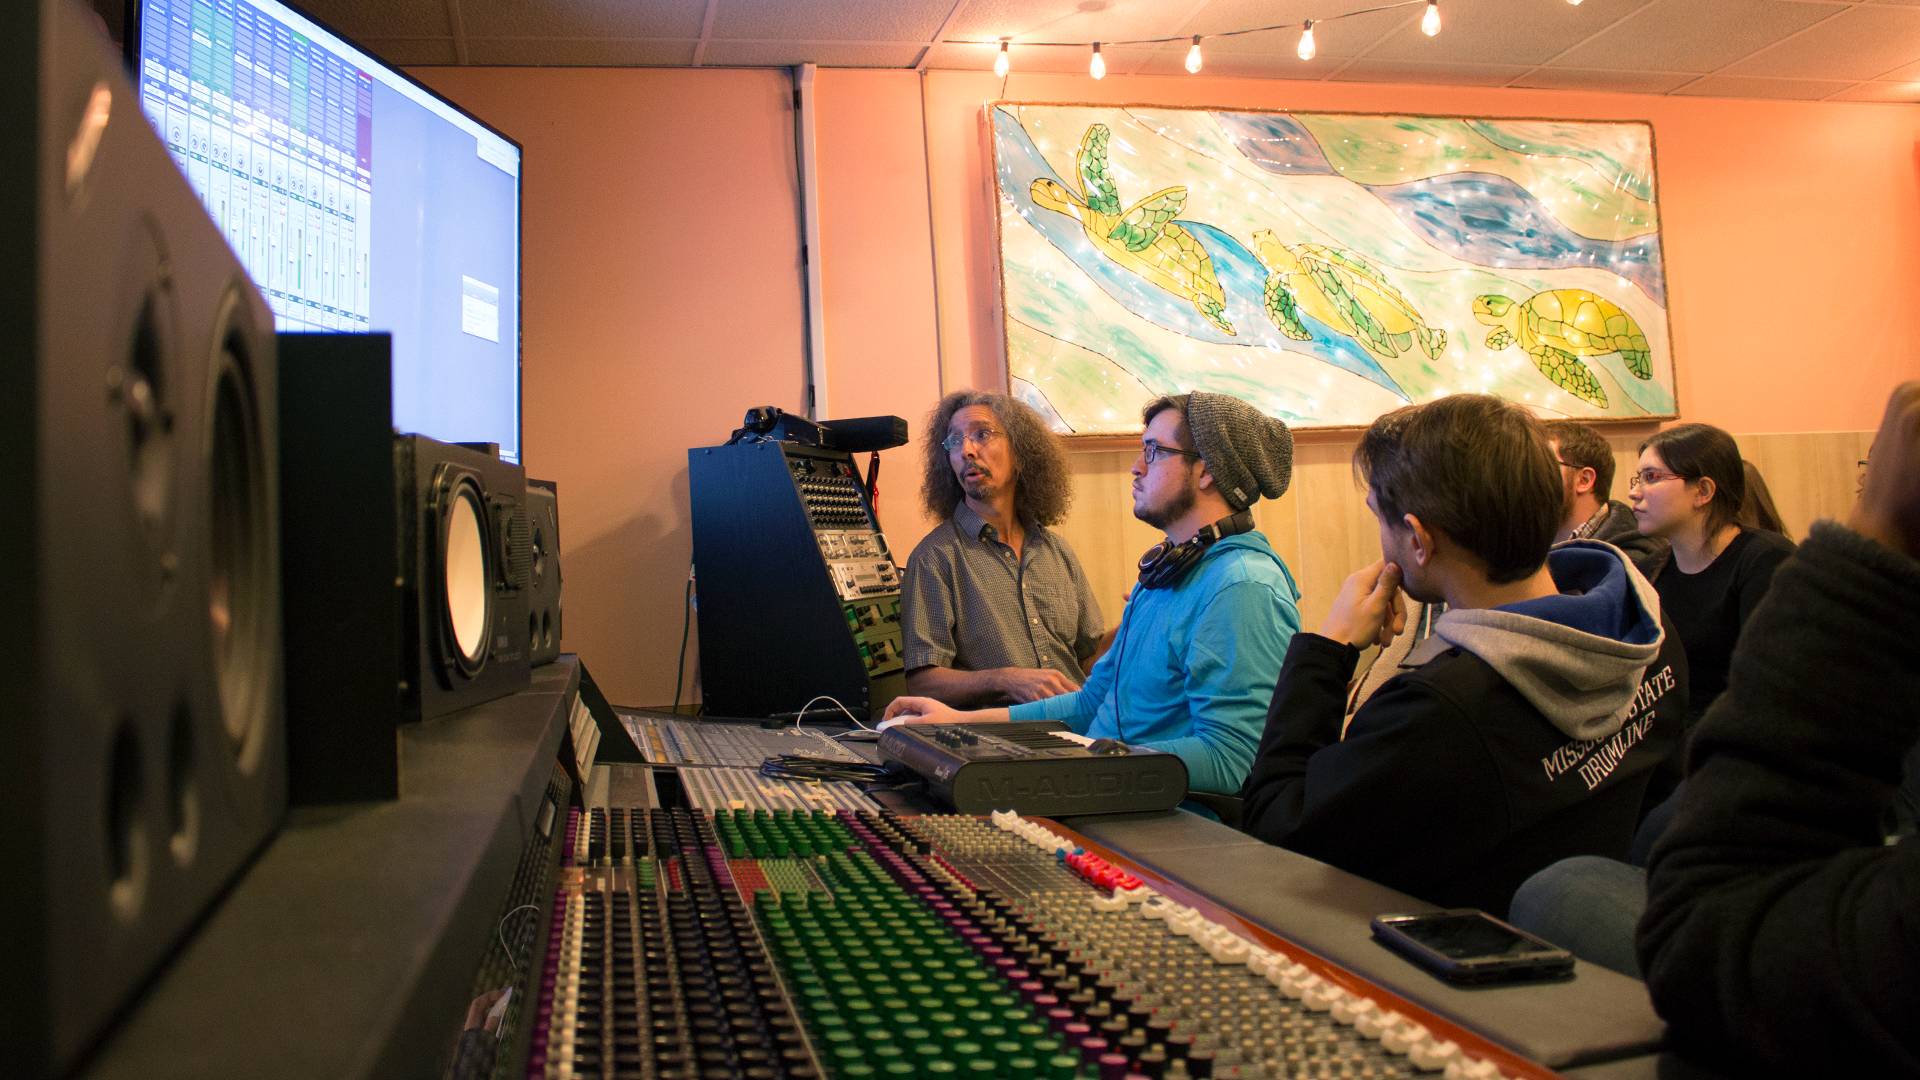 Recording arts students gather around screen and sound board